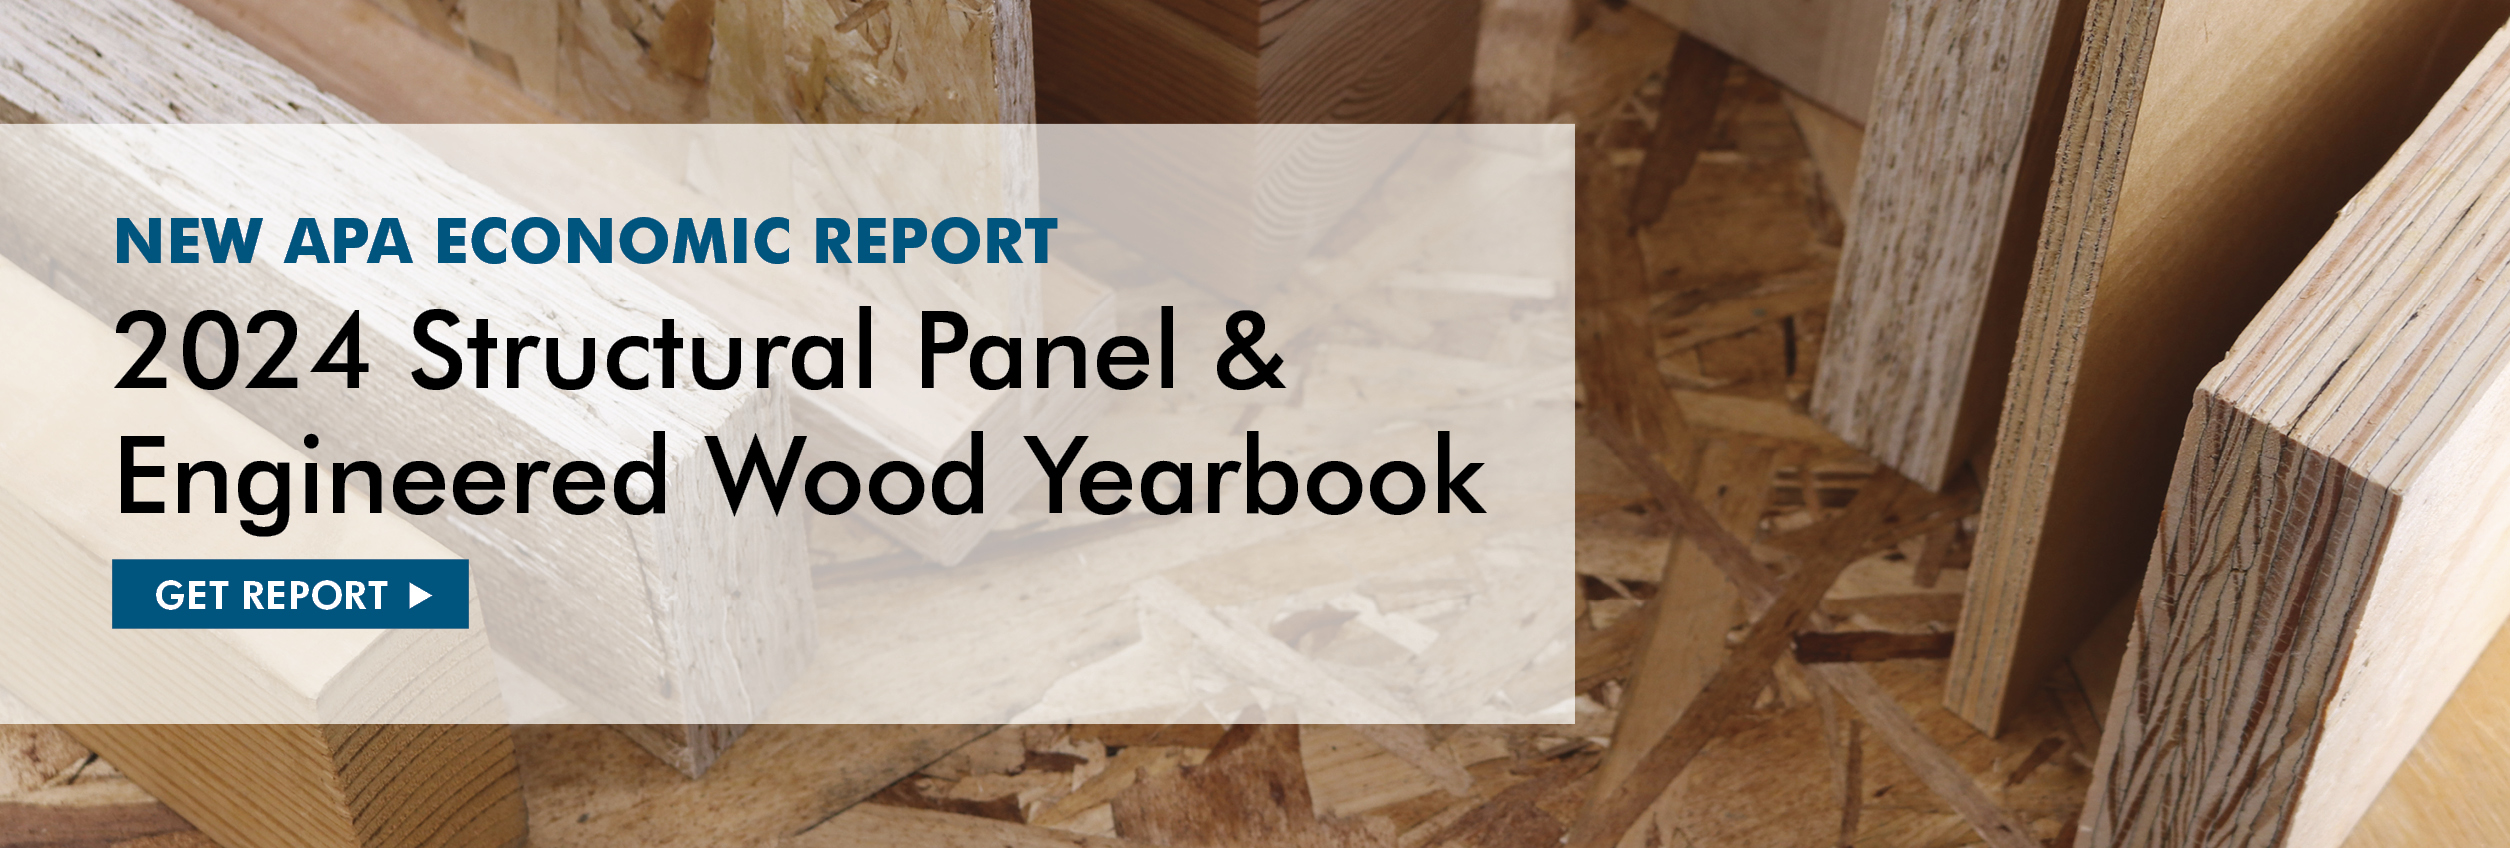 2024 Structural Panel & Engineered Wood Yearbook